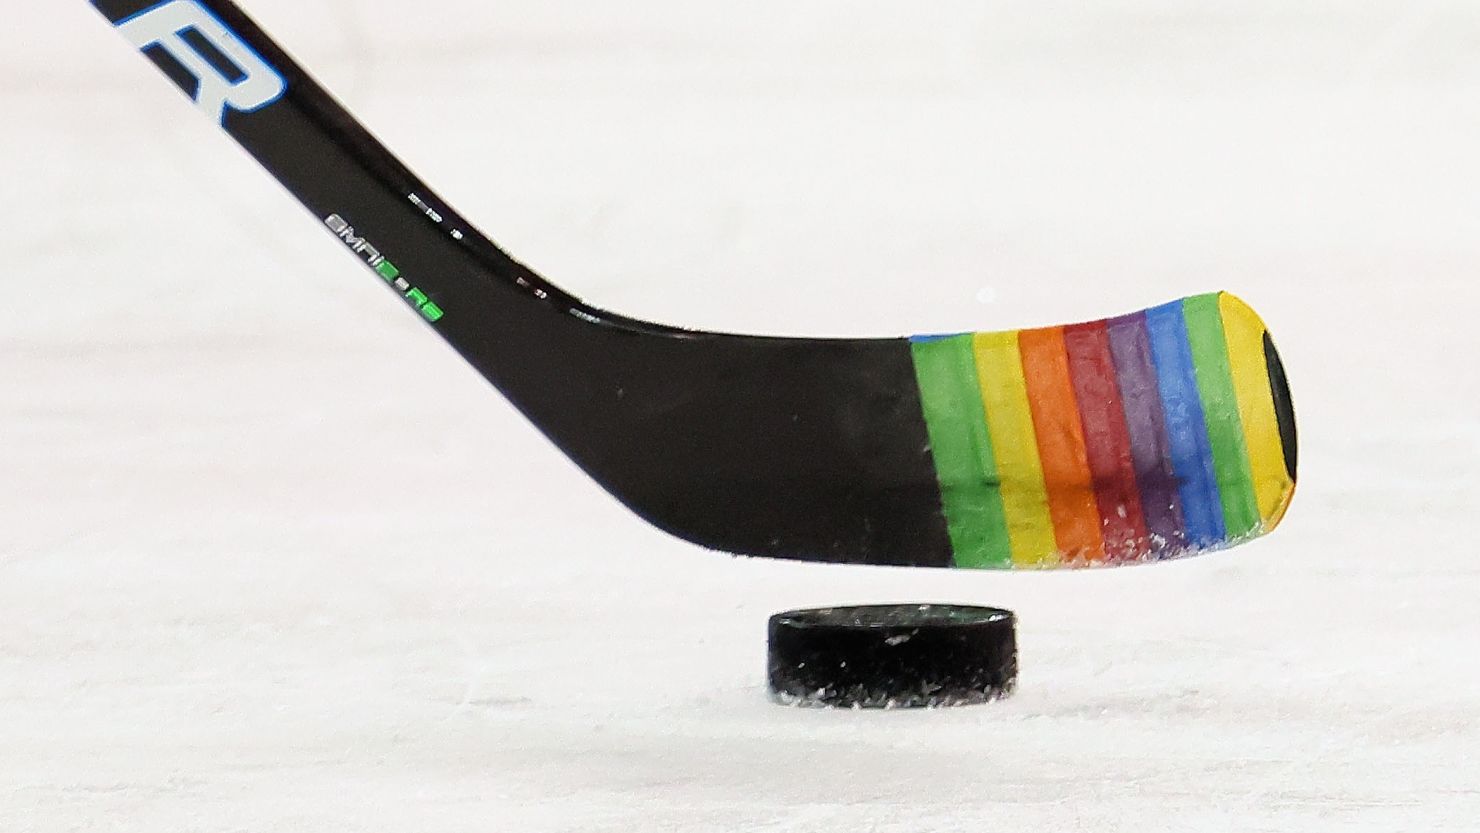 The NHL has dropped the ban it had initially instituted in June.